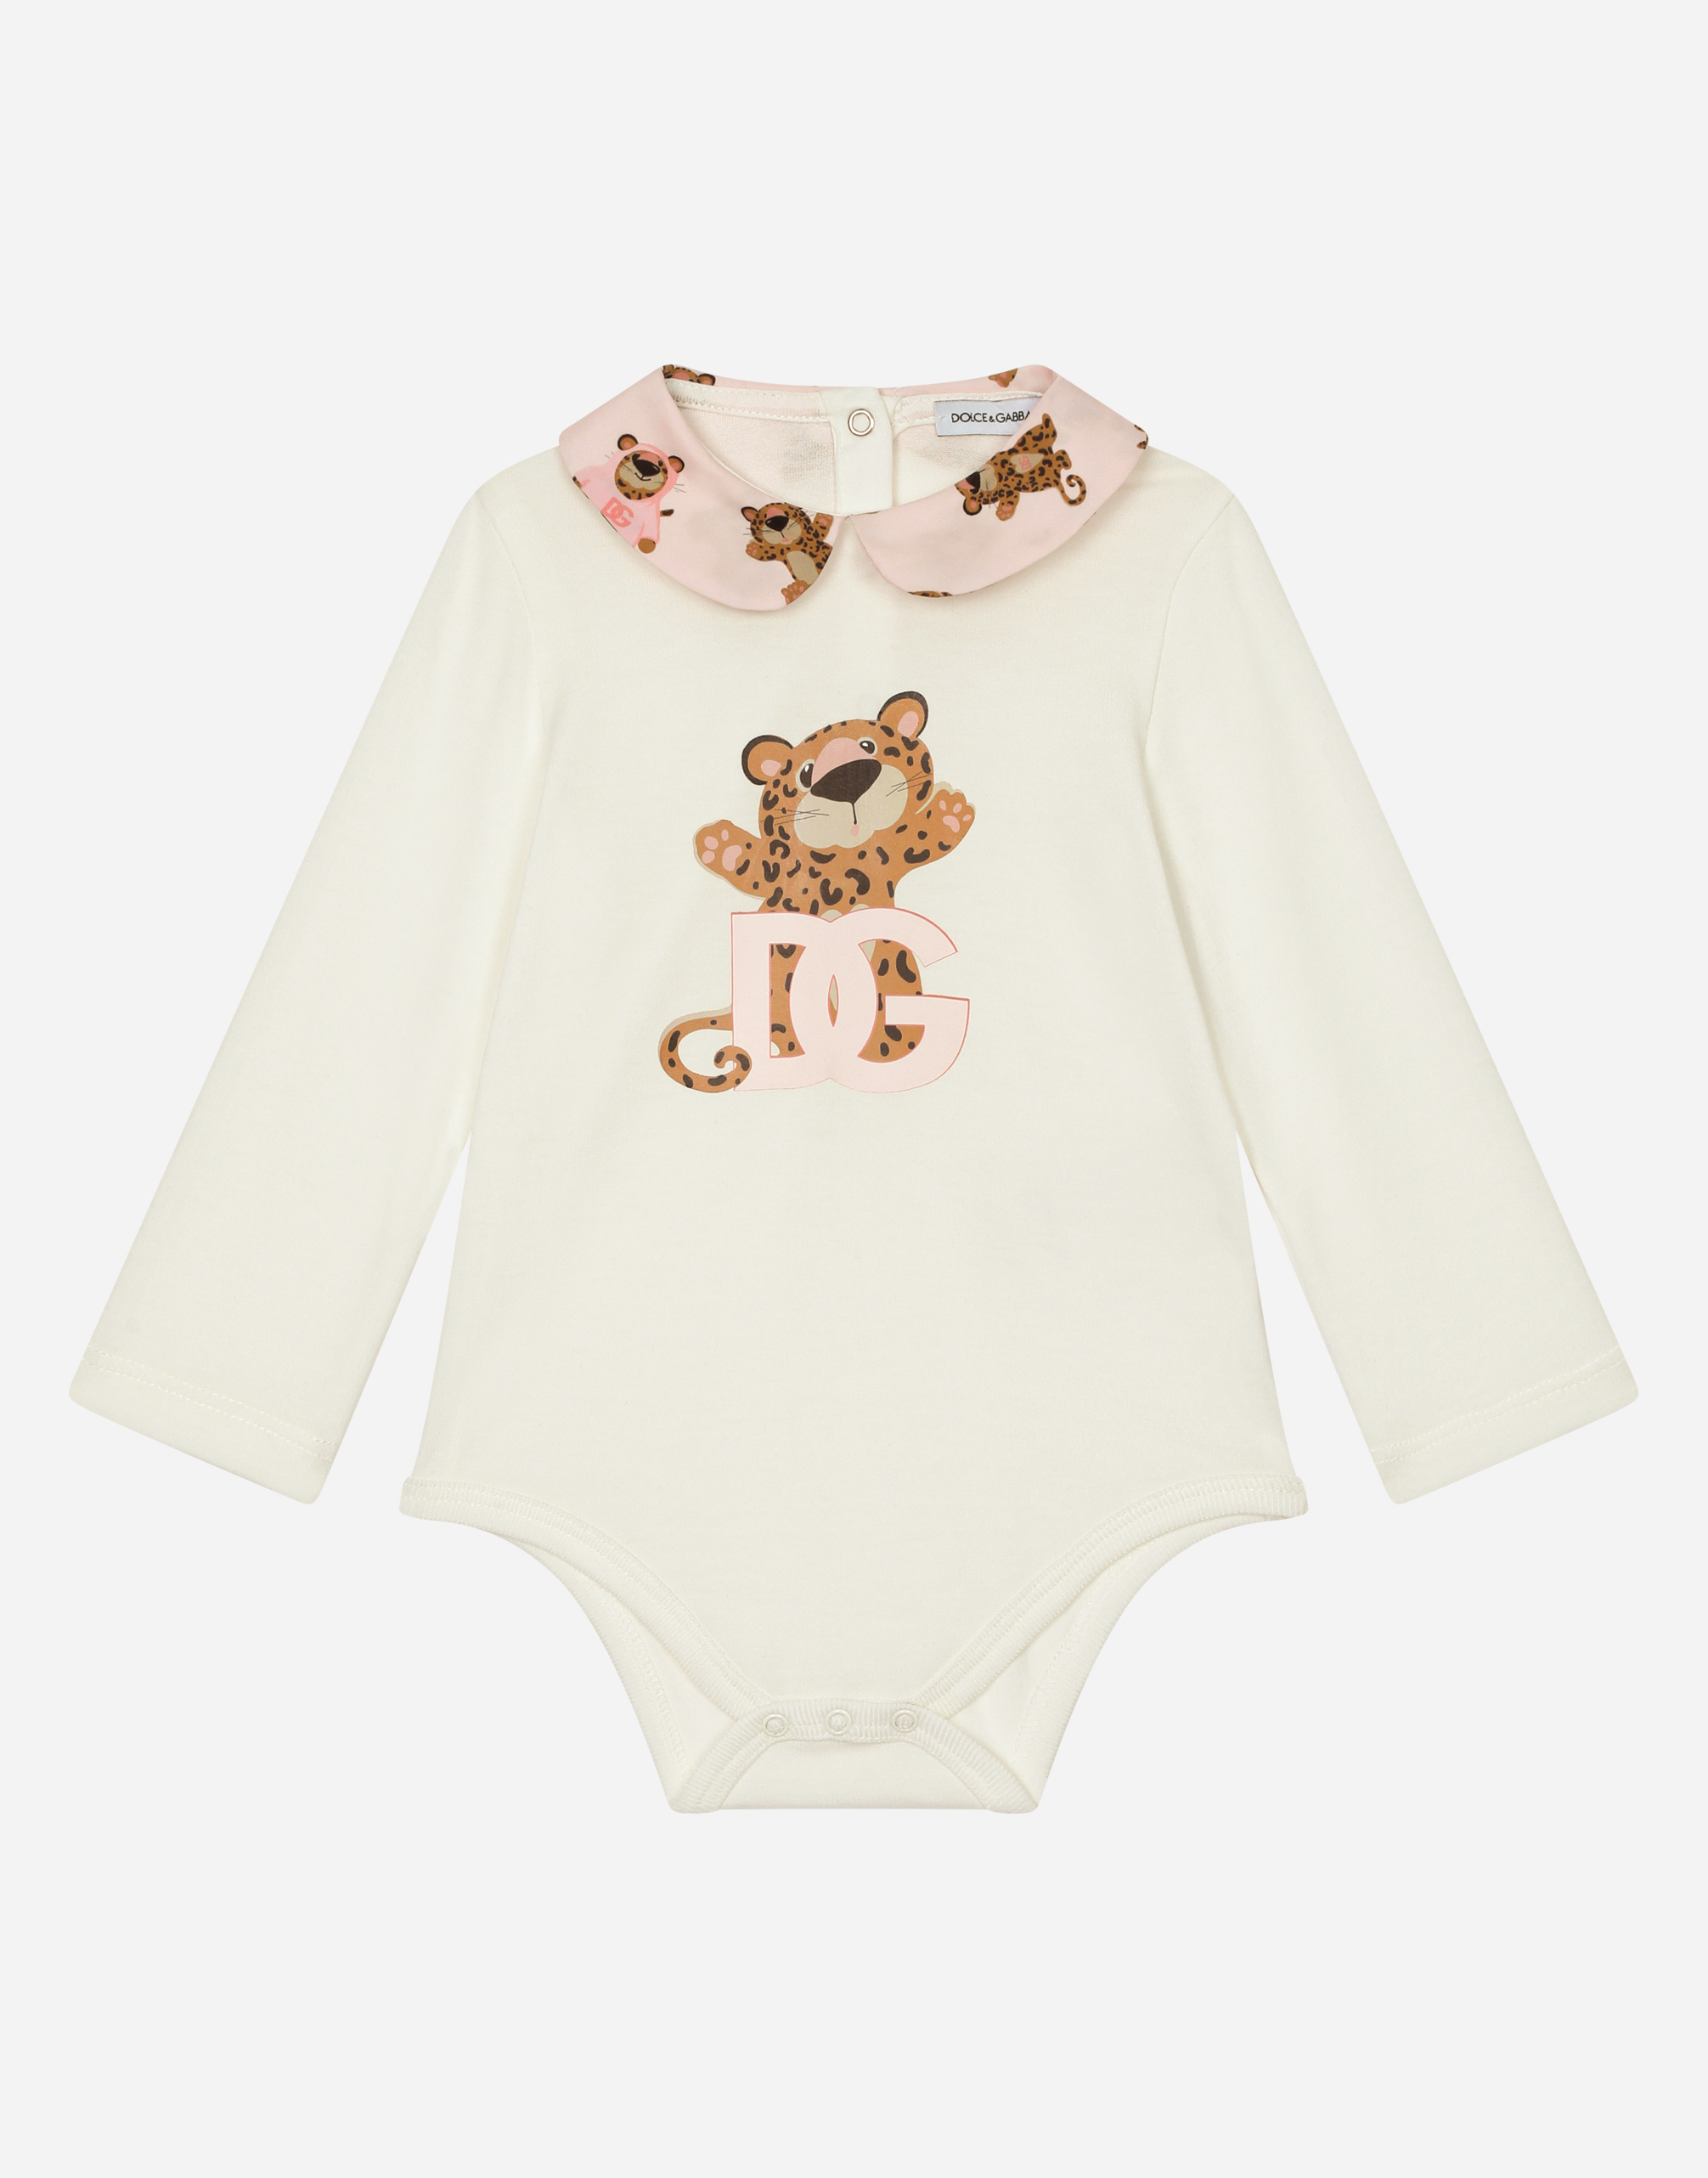 DOLCE & GABBANA LONG-SLEEVED BABYGROW WITH BABY LEOPARD PRINT